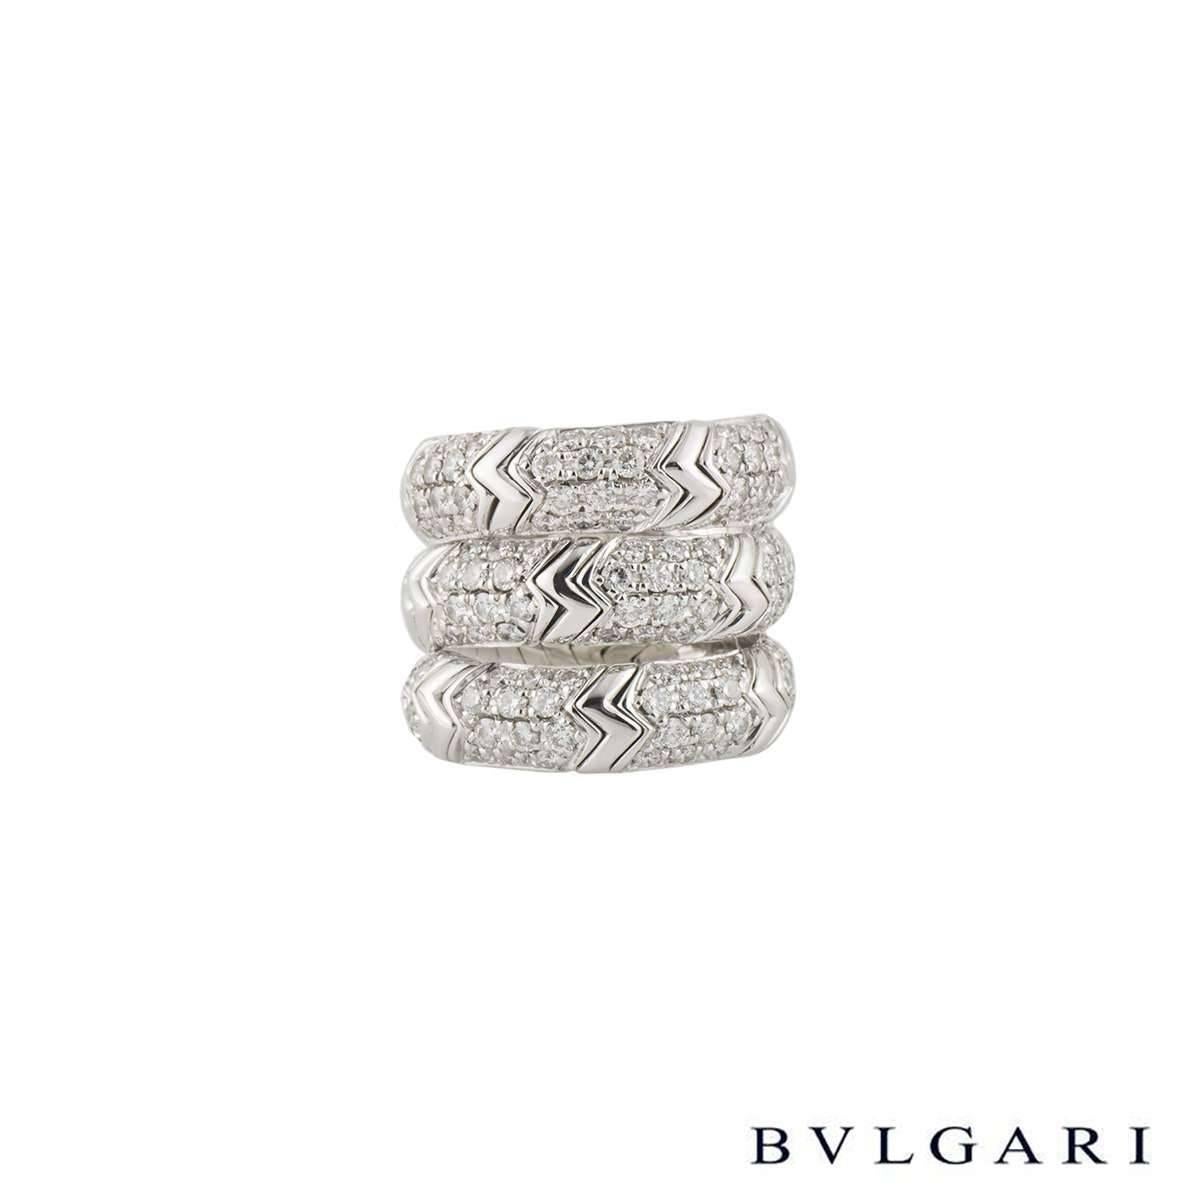 A luxurious 18k white gold Bvlgari diamond jewellery suite from the Spiga collection. The jewellery suite comprises of a necklace, earrings, bangle and ring. The necklace comprises of a heavy spiga linked motif with 5 link evenly placed through the